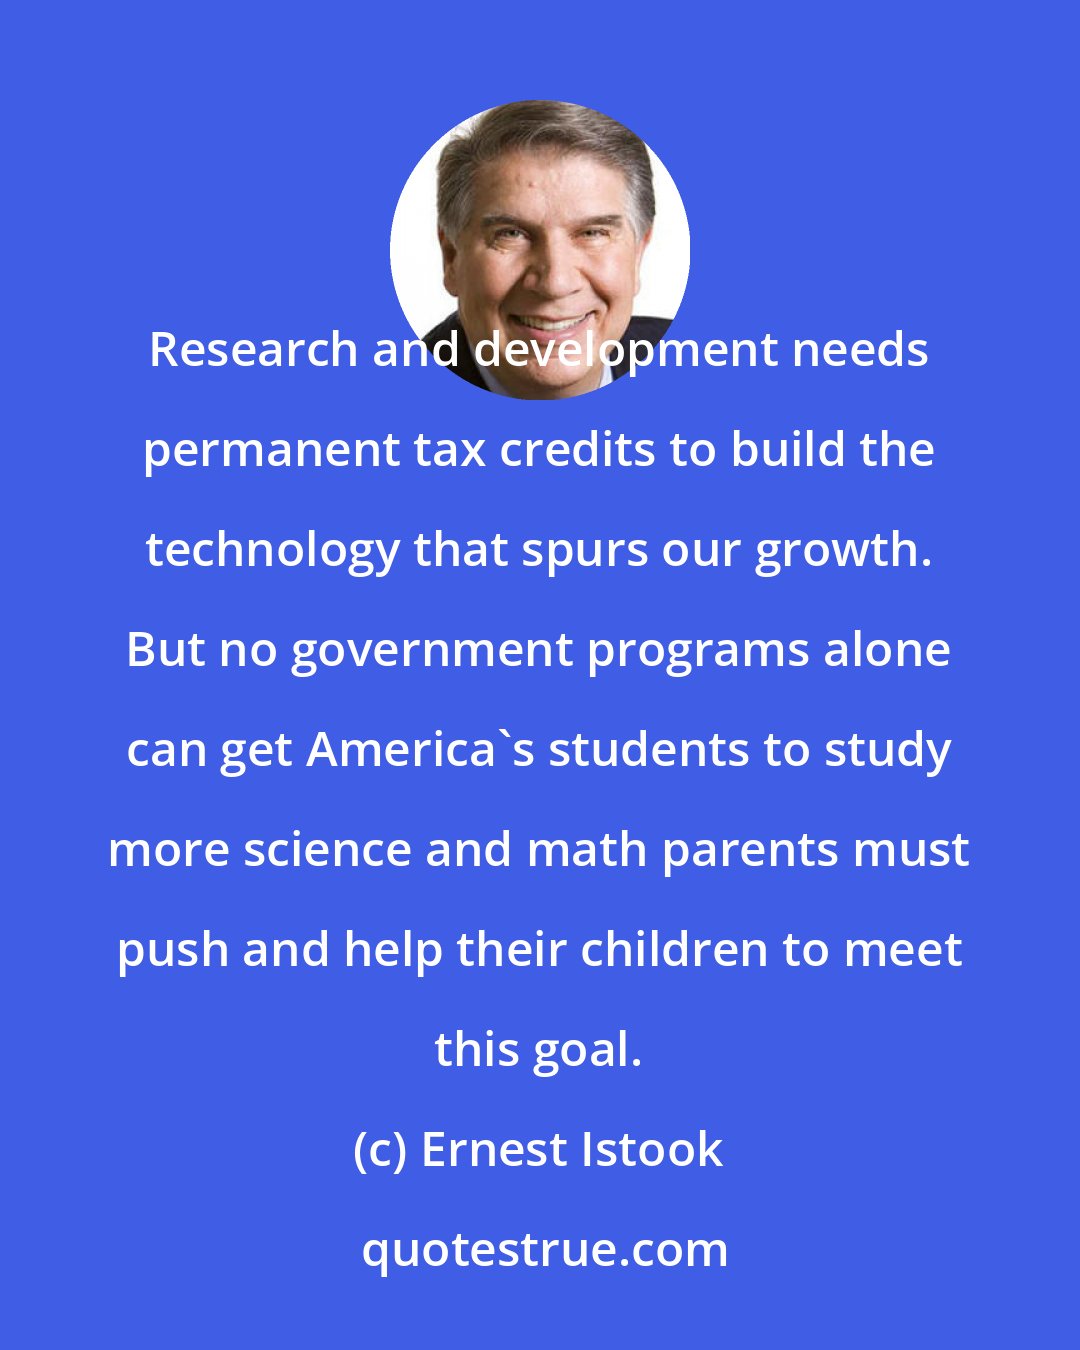 Ernest Istook: Research and development needs permanent tax credits to build the technology that spurs our growth. But no government programs alone can get America's students to study more science and math parents must push and help their children to meet this goal.